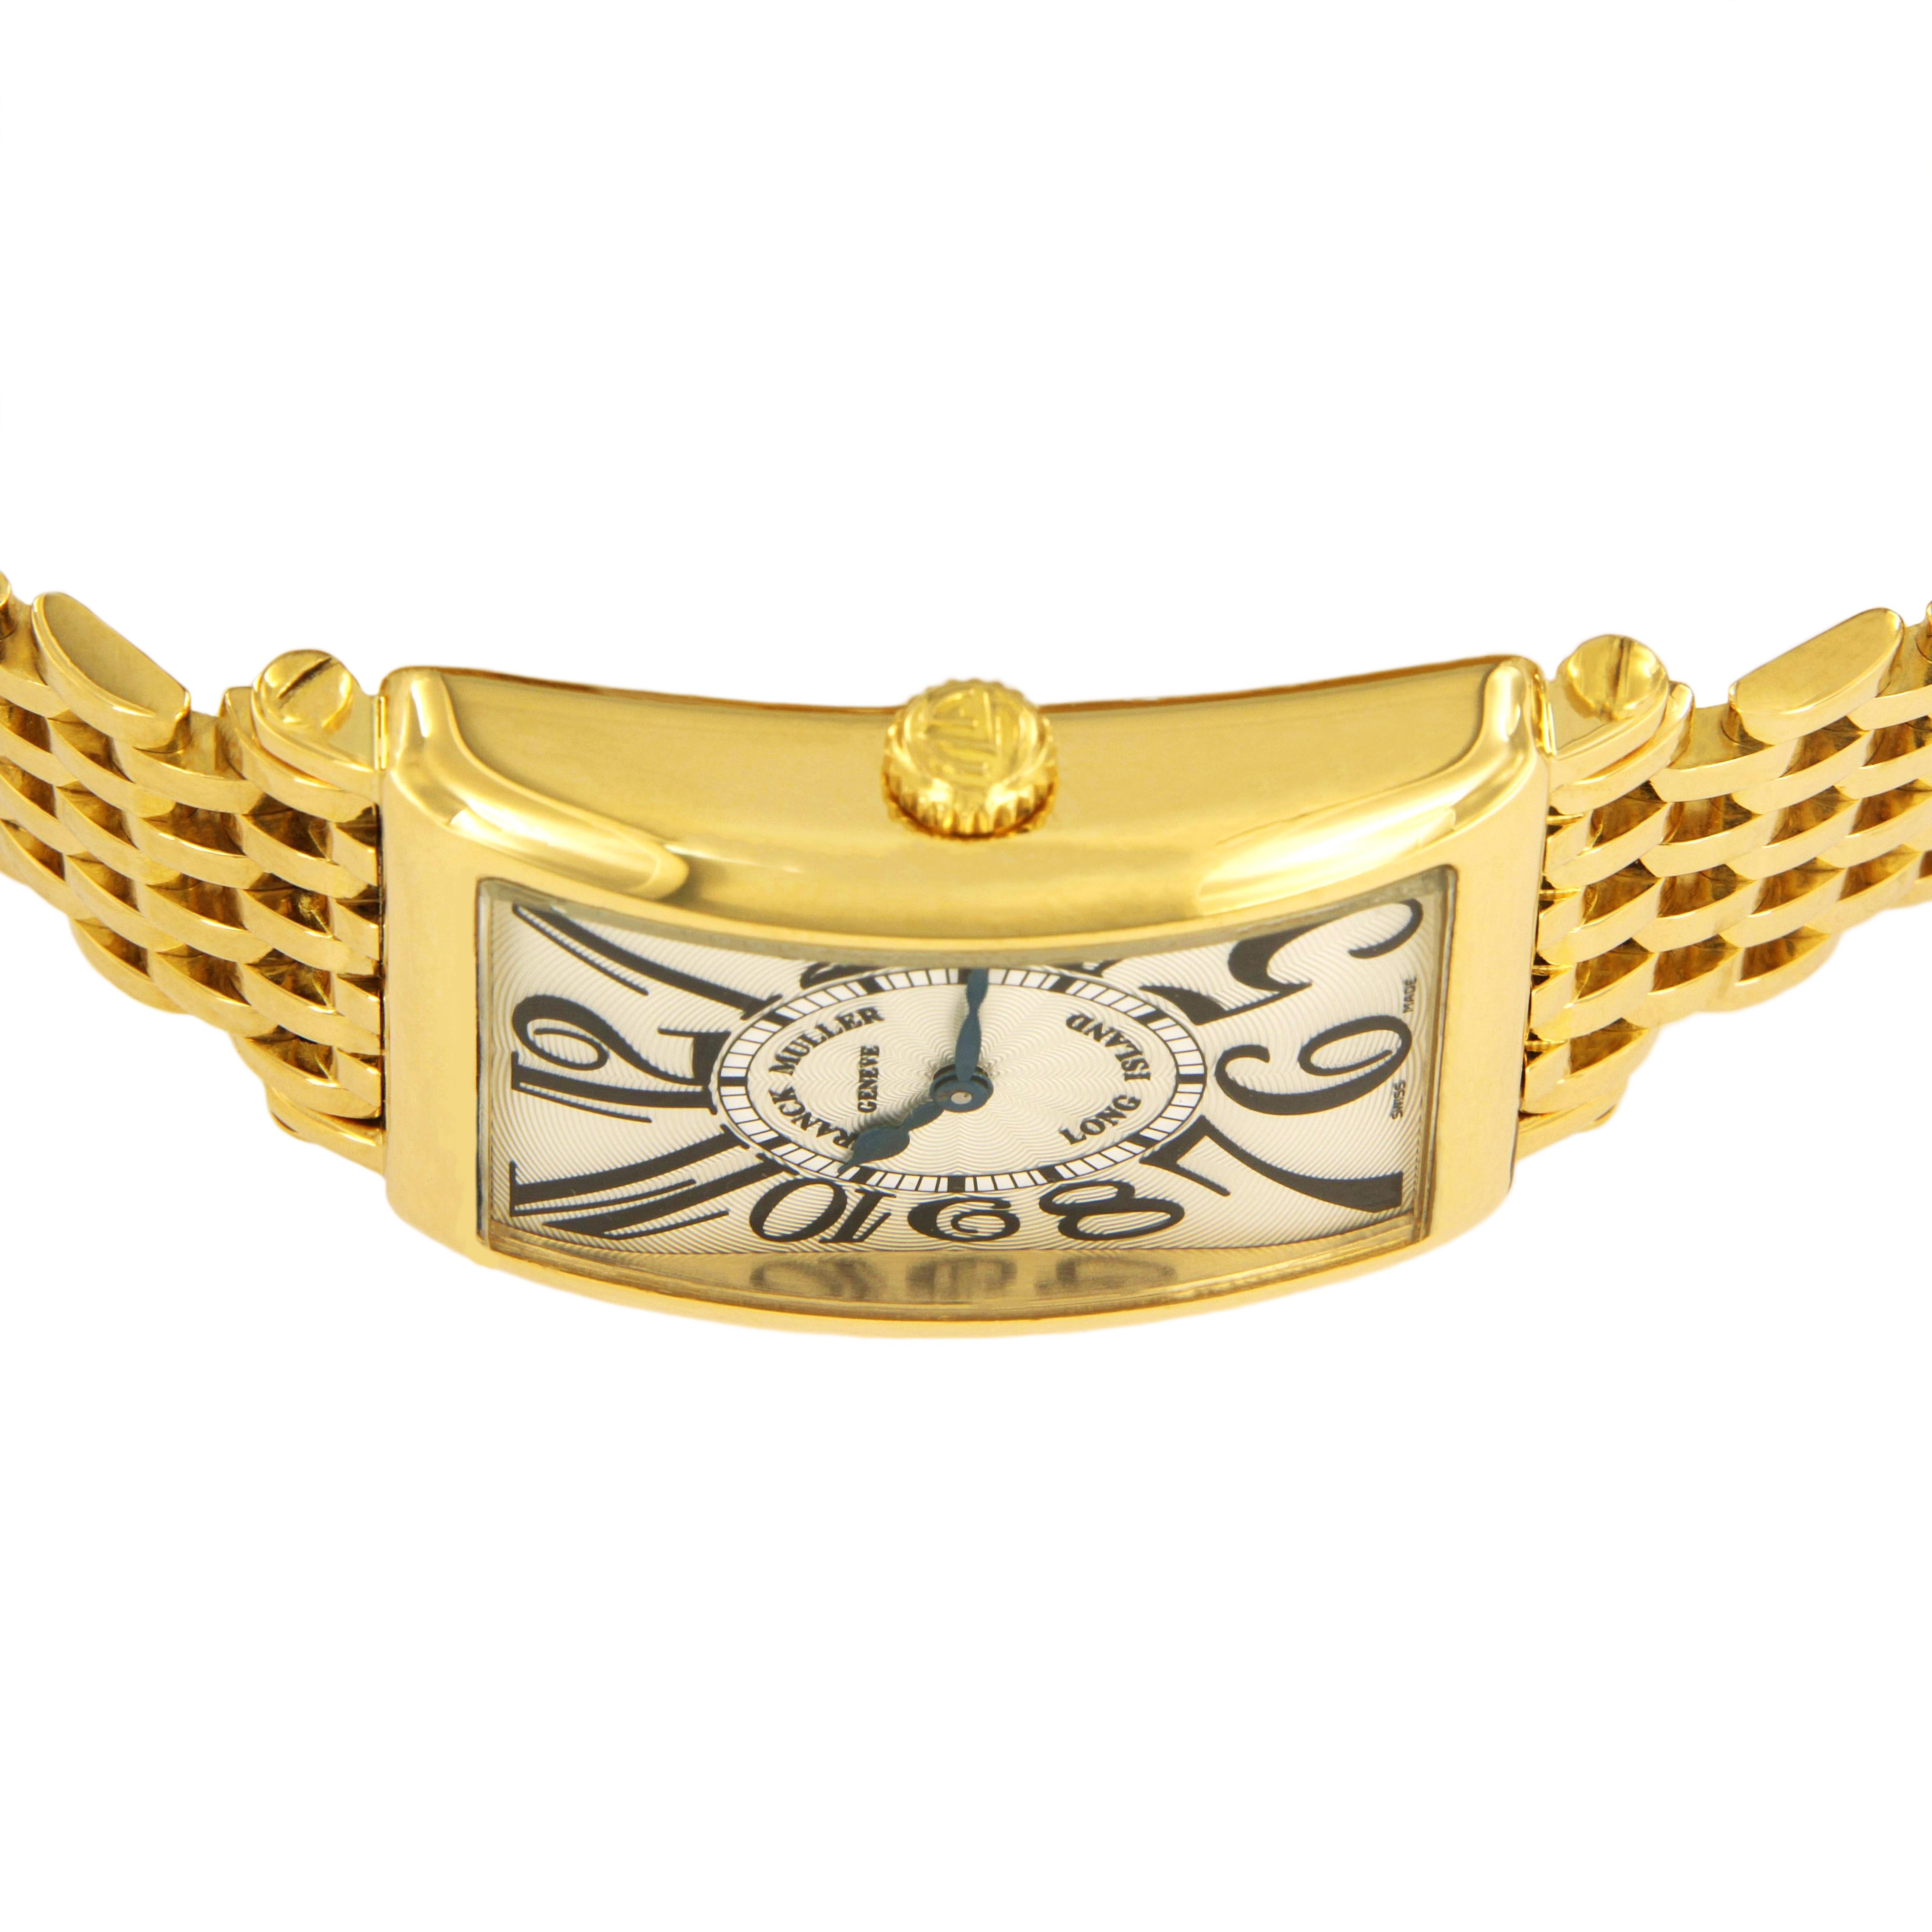 FRANCK MULLER RARE LONG ISLAND 18K YELLOW GOLD WATCH 950QZ

-Mint condition 
-18k Yellow Gold
-Case size: 26x36mm
-Movement: Quartz
-Curved rectangle shape
-Dial: Silver
-Arabic Numeral
-Deploy buckle
-Full links 

*Comes with Box, No Papers.